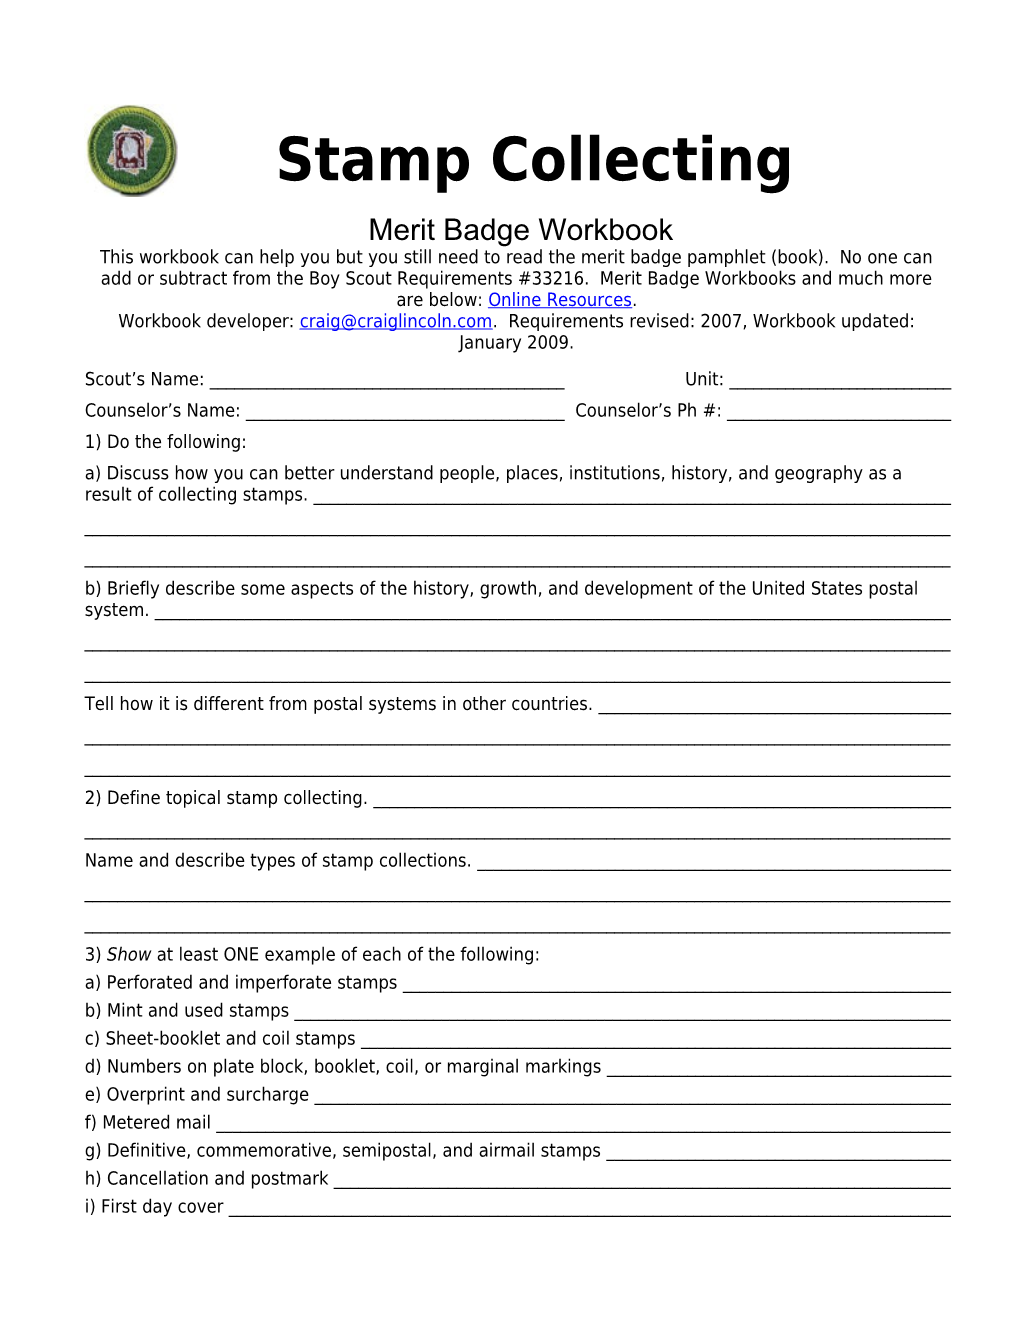 Stamp Collecting P. 1 Merit Badge Workbookscout's Name: ______